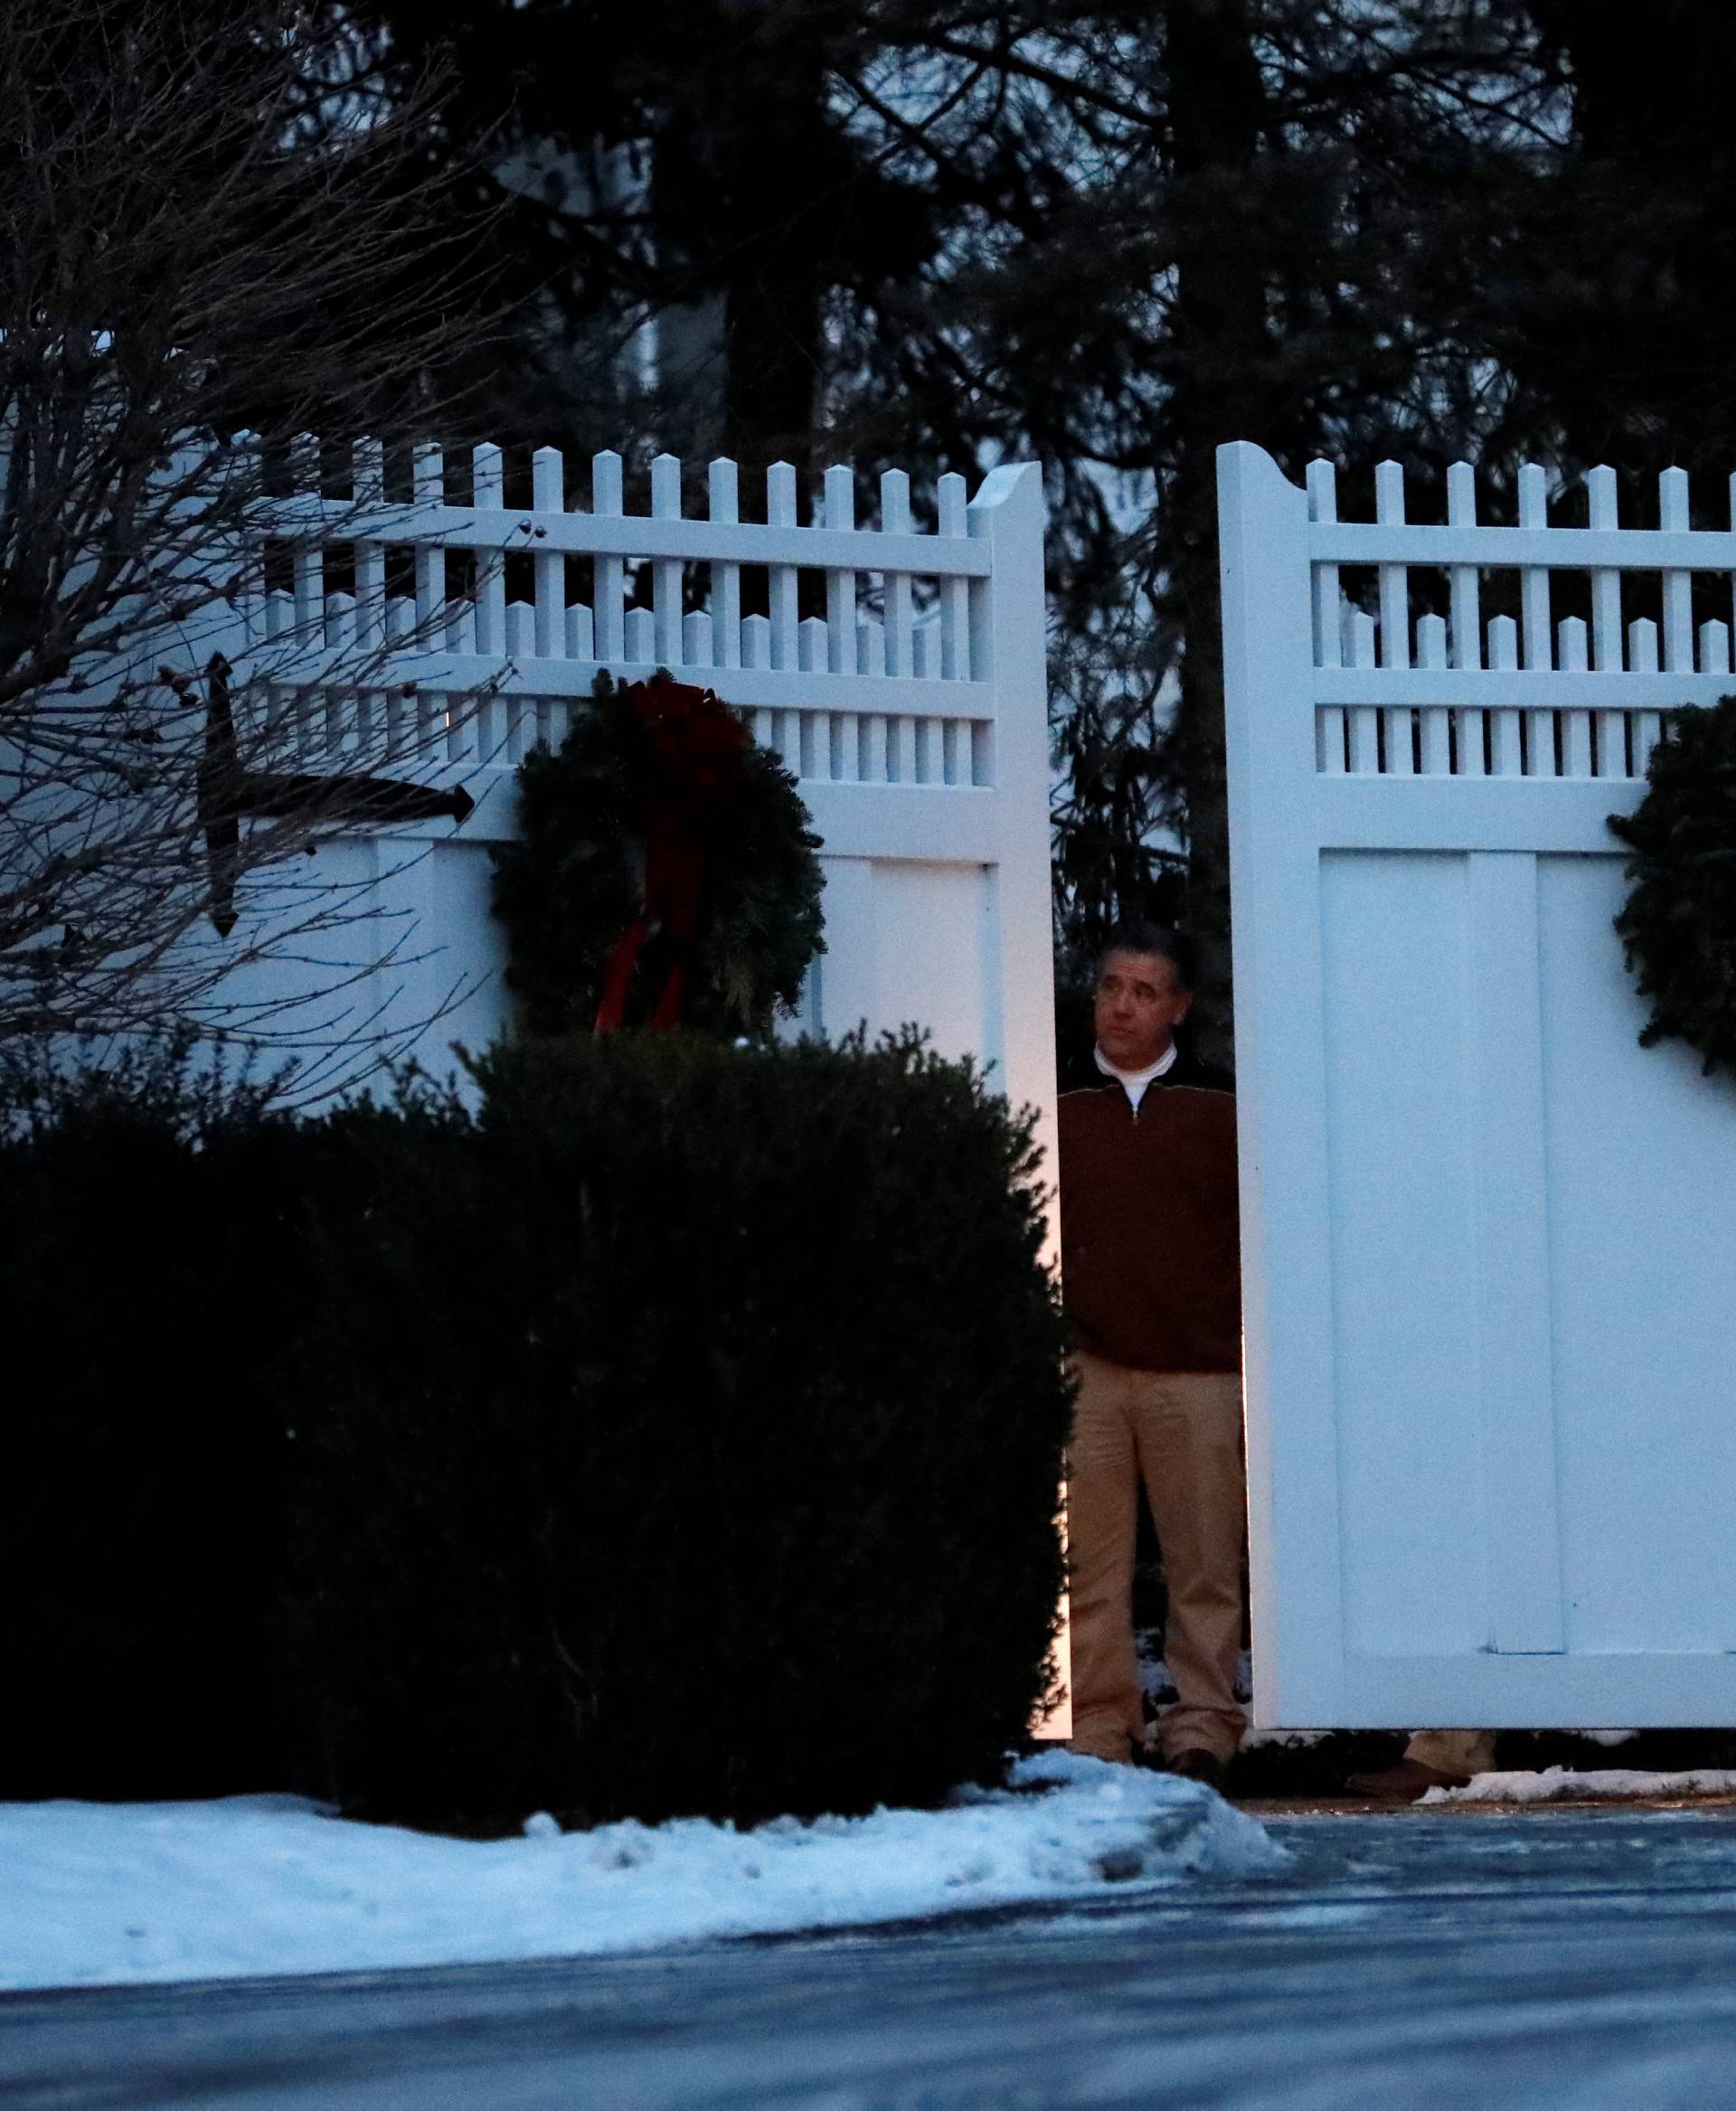 A man is seen at the gate to the home of former U.S. President Bill Clinton and former Democratic presidential candidate Hillary Clinton after firefighters were called to put out a fire at the property in Chappaqua